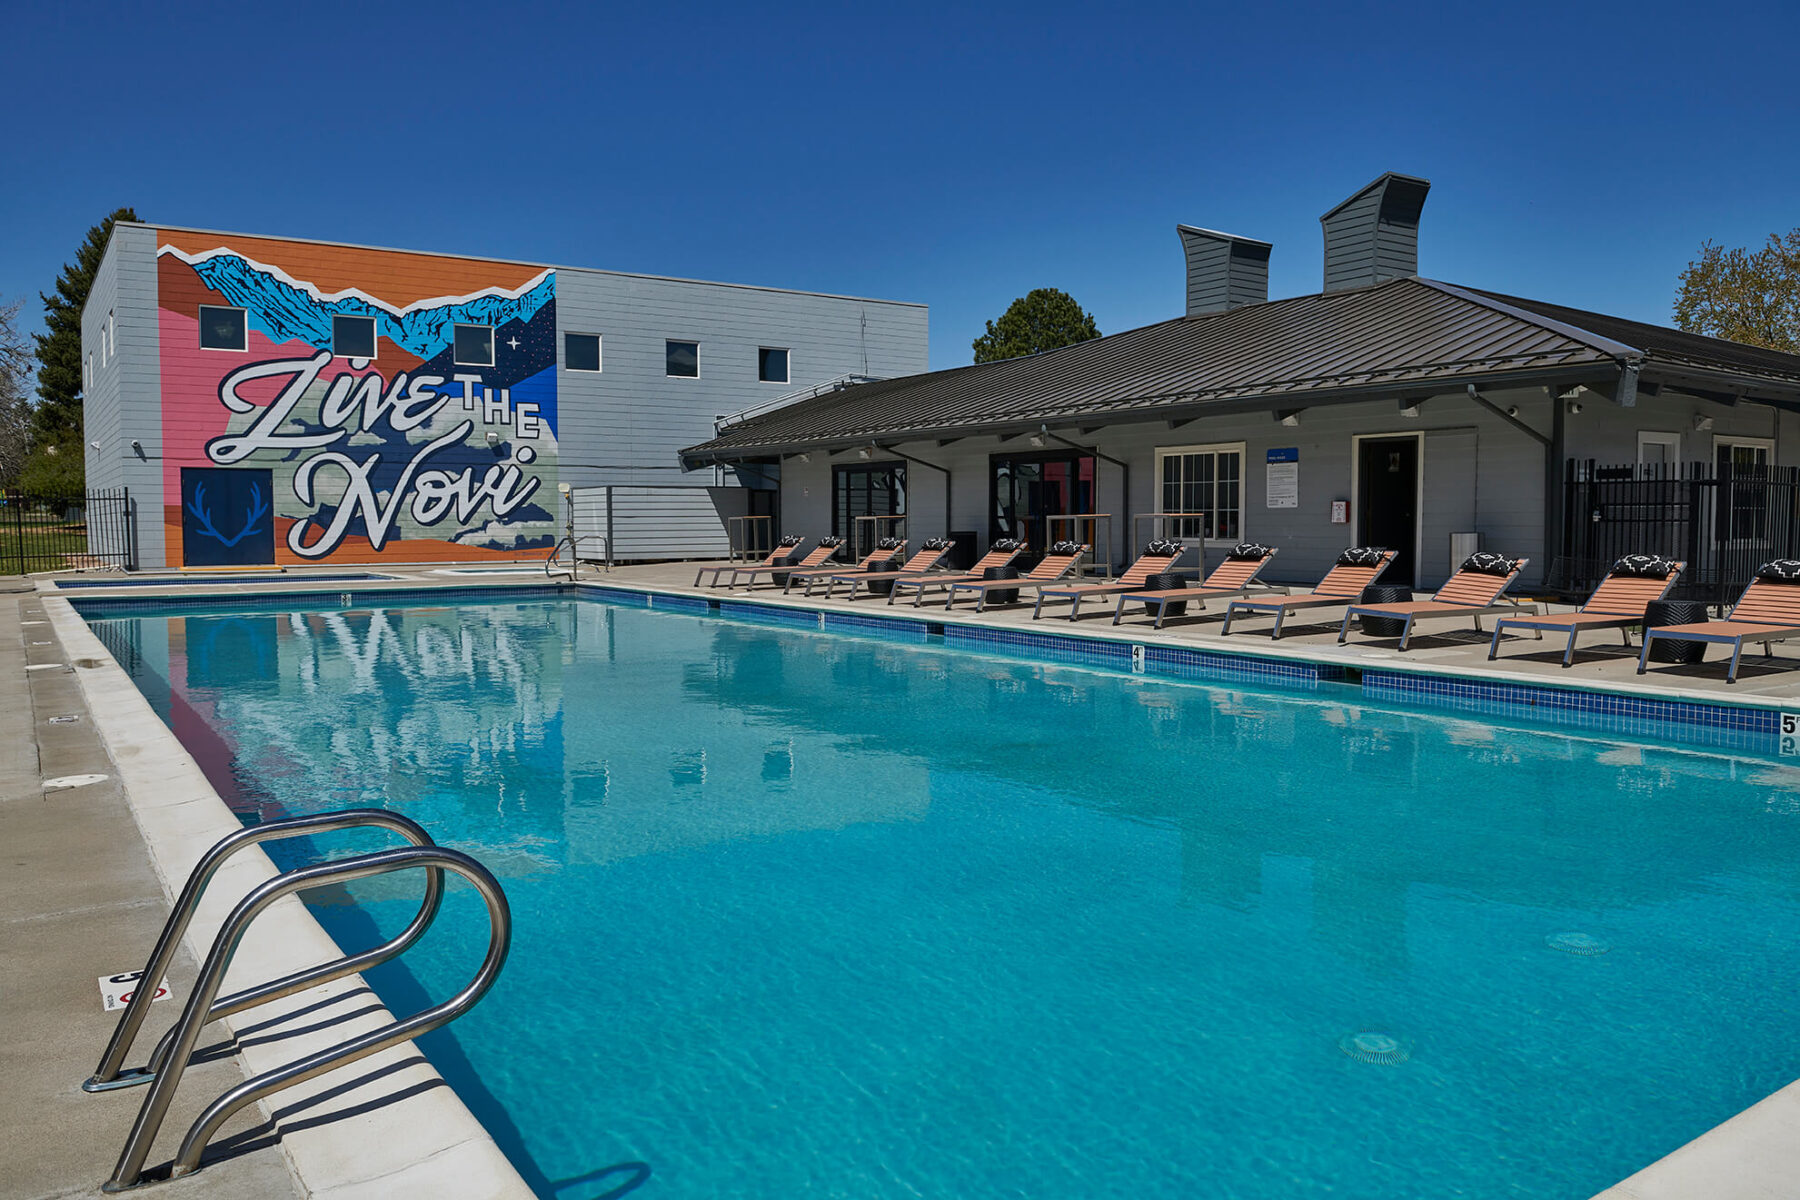 wide view of the pool and lounge poolside chairs with the colorful mural on the wall